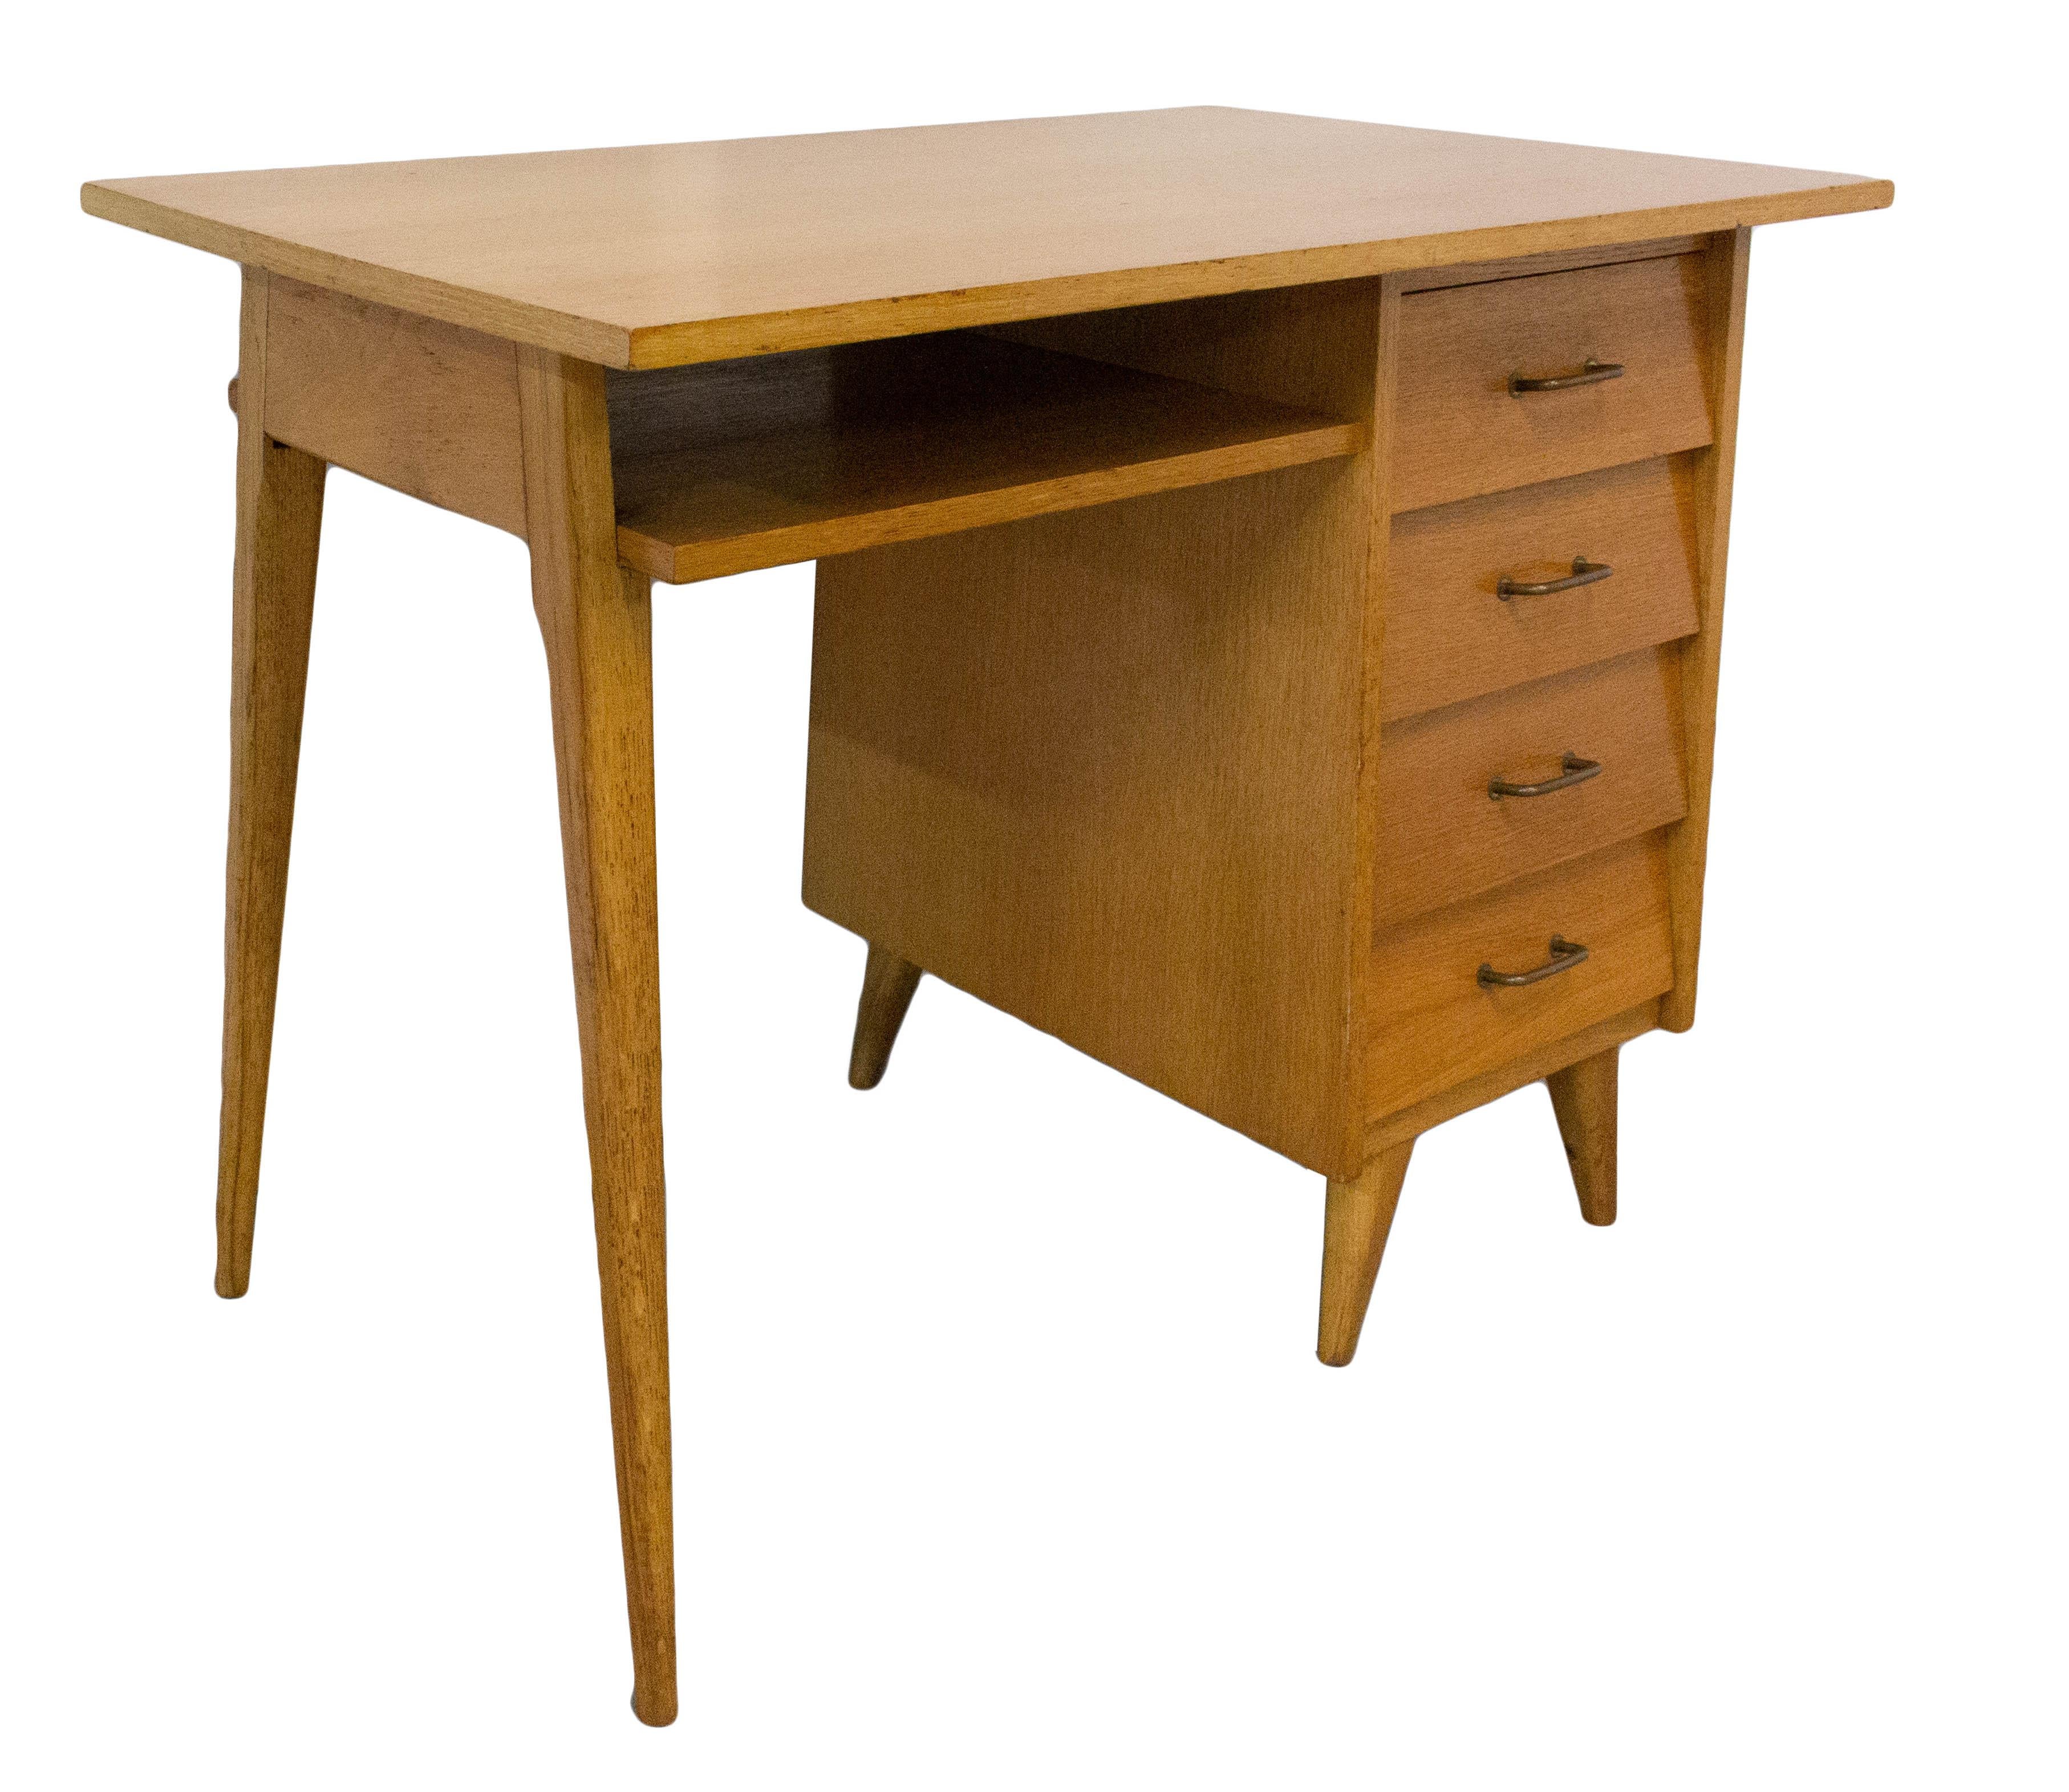 French compas desk writing table Midcentury
Oak veneer and solid oak
Four drawers
Good vintage condition with minor signs of use and wear.

For shipping: 75 x 59 x 99 cm 26kg.